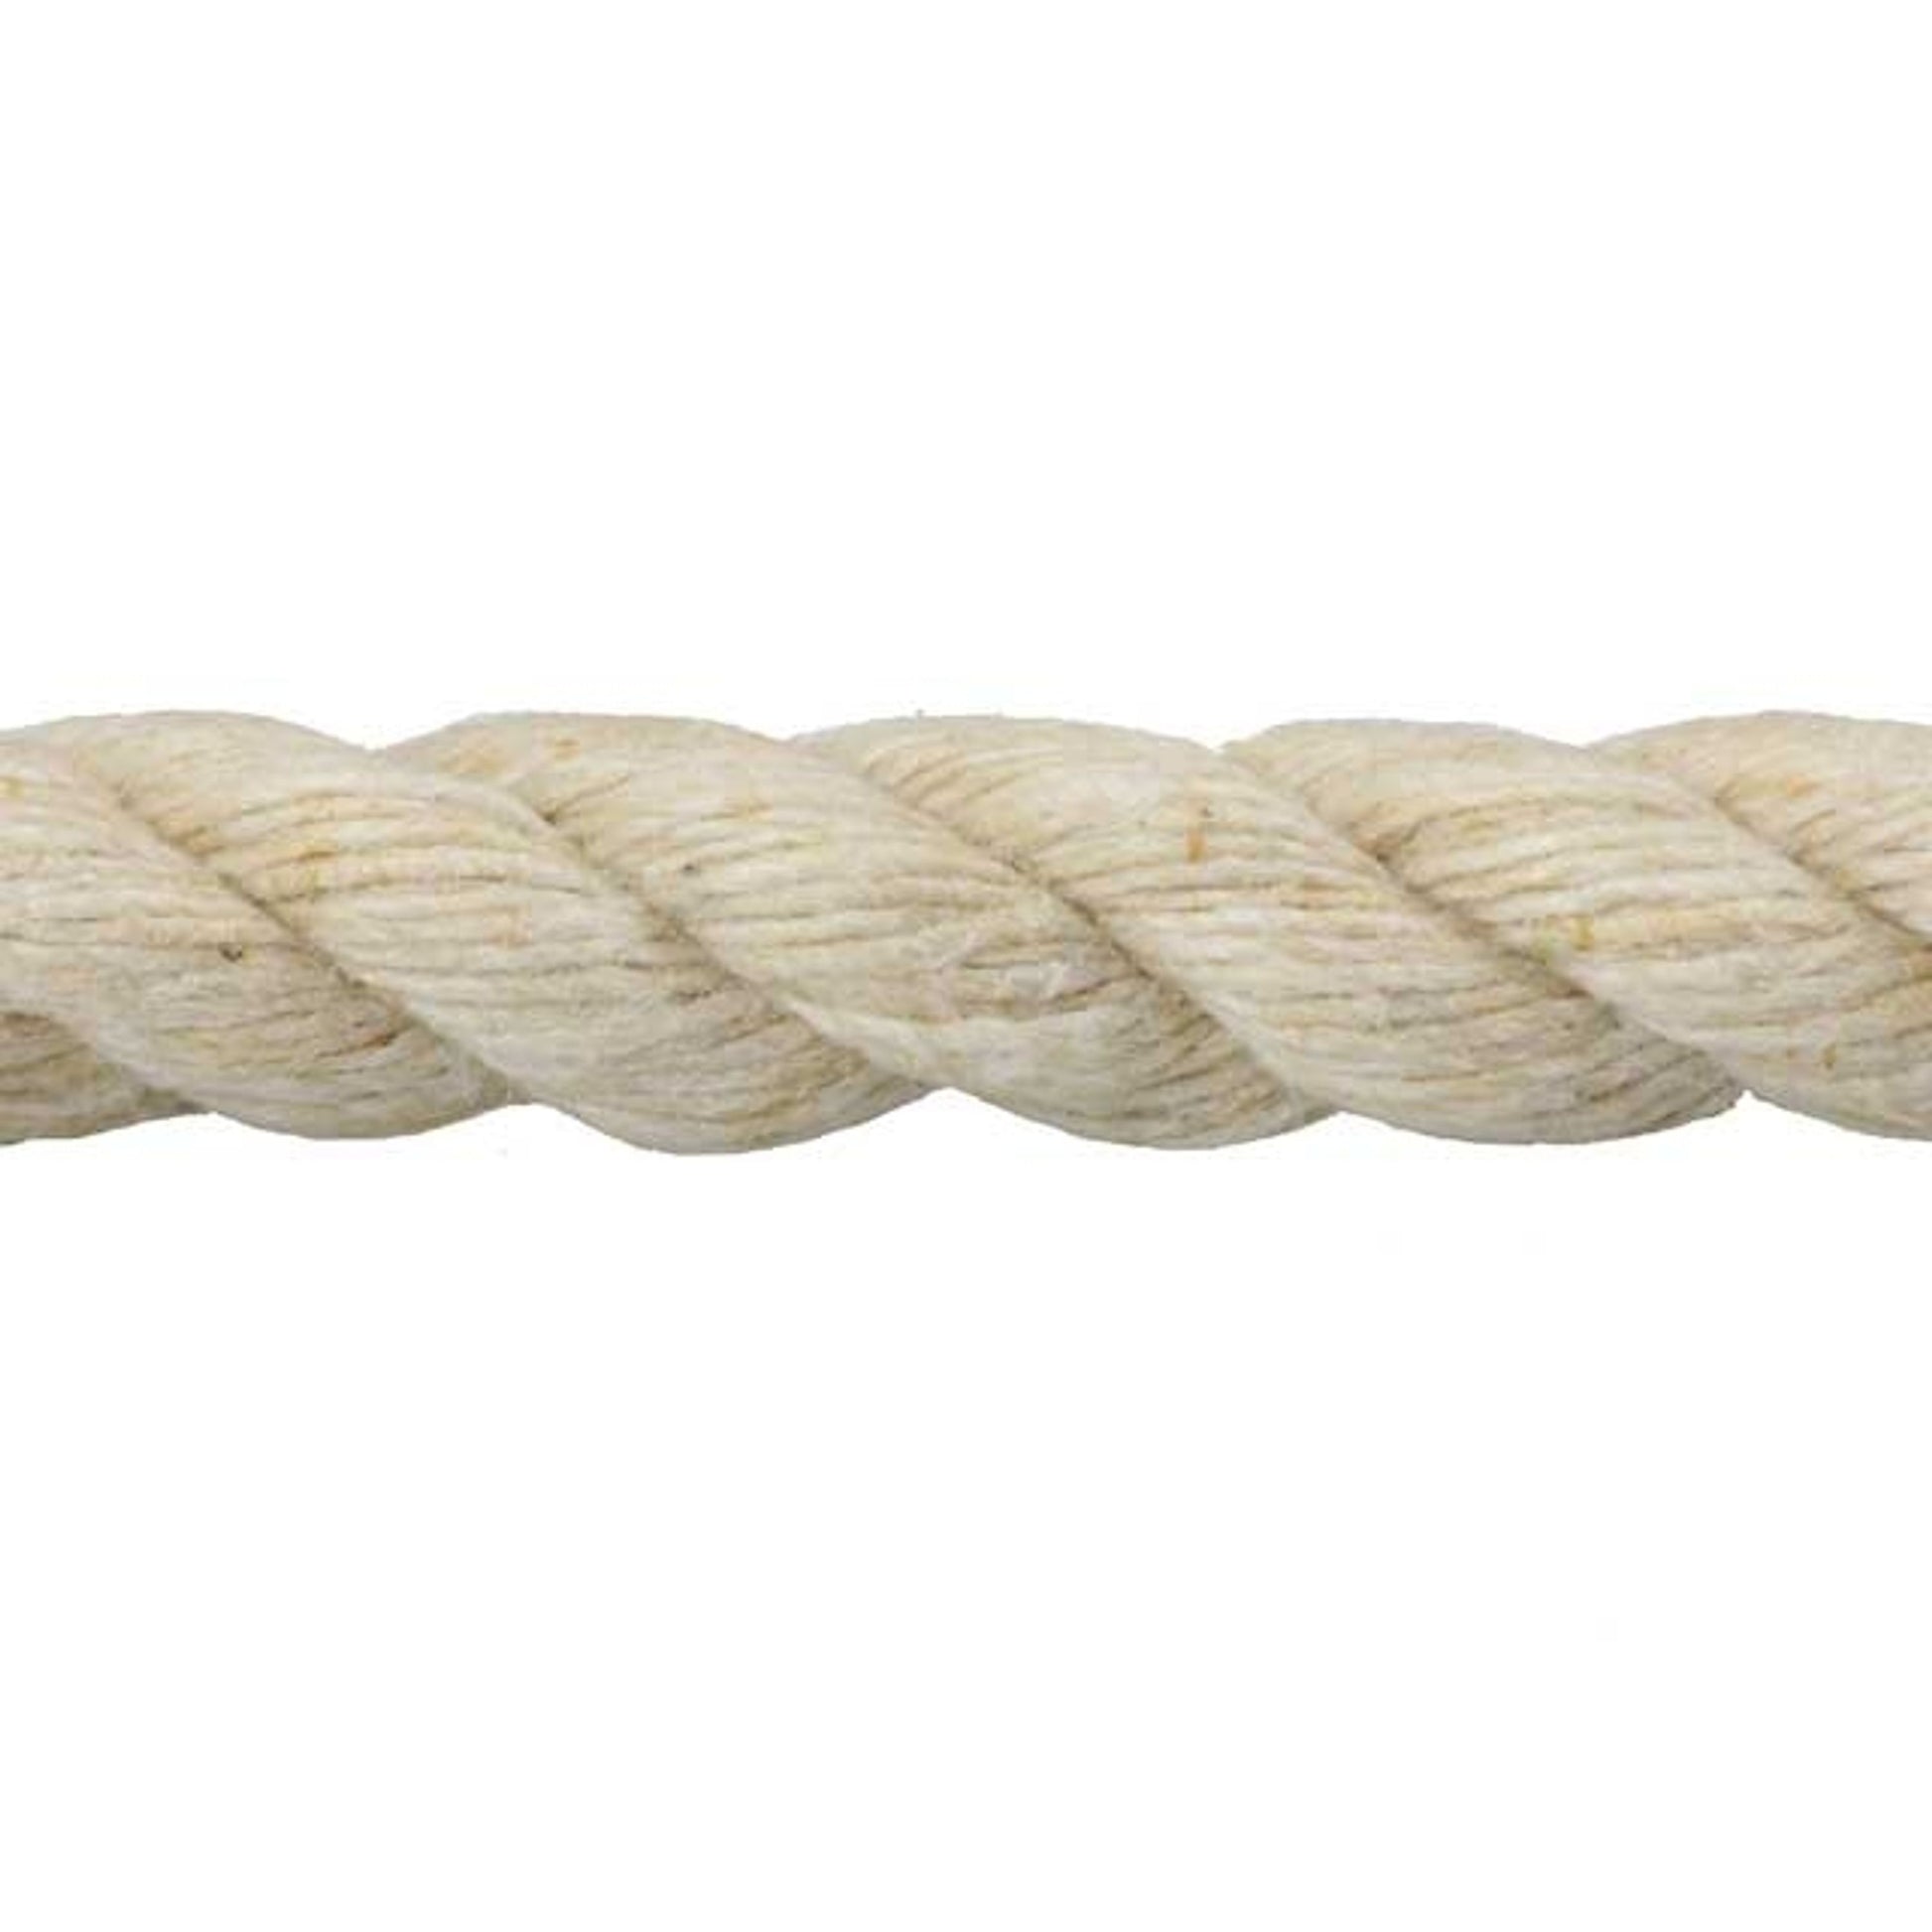 Twisted Cotton Rope, 1-1/4 inch, 3 Strand, Natural